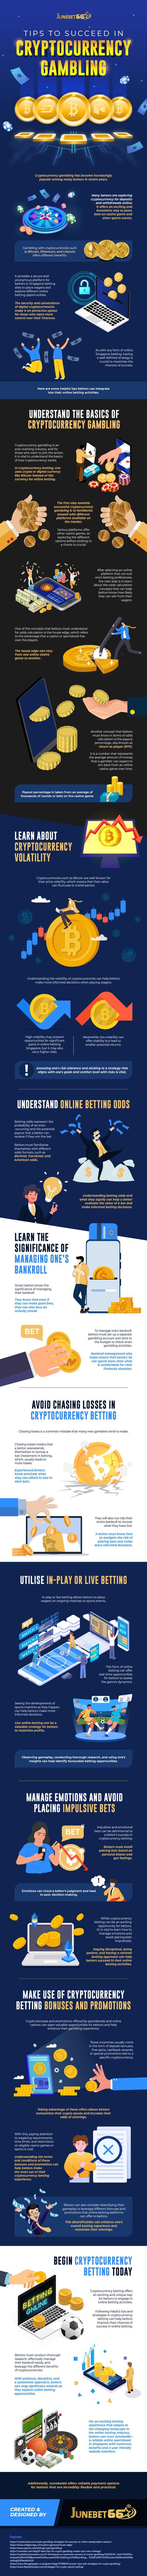 Tips-to-Succeed-in-Cryptocurrency-Gambling-Infographic-Image-000